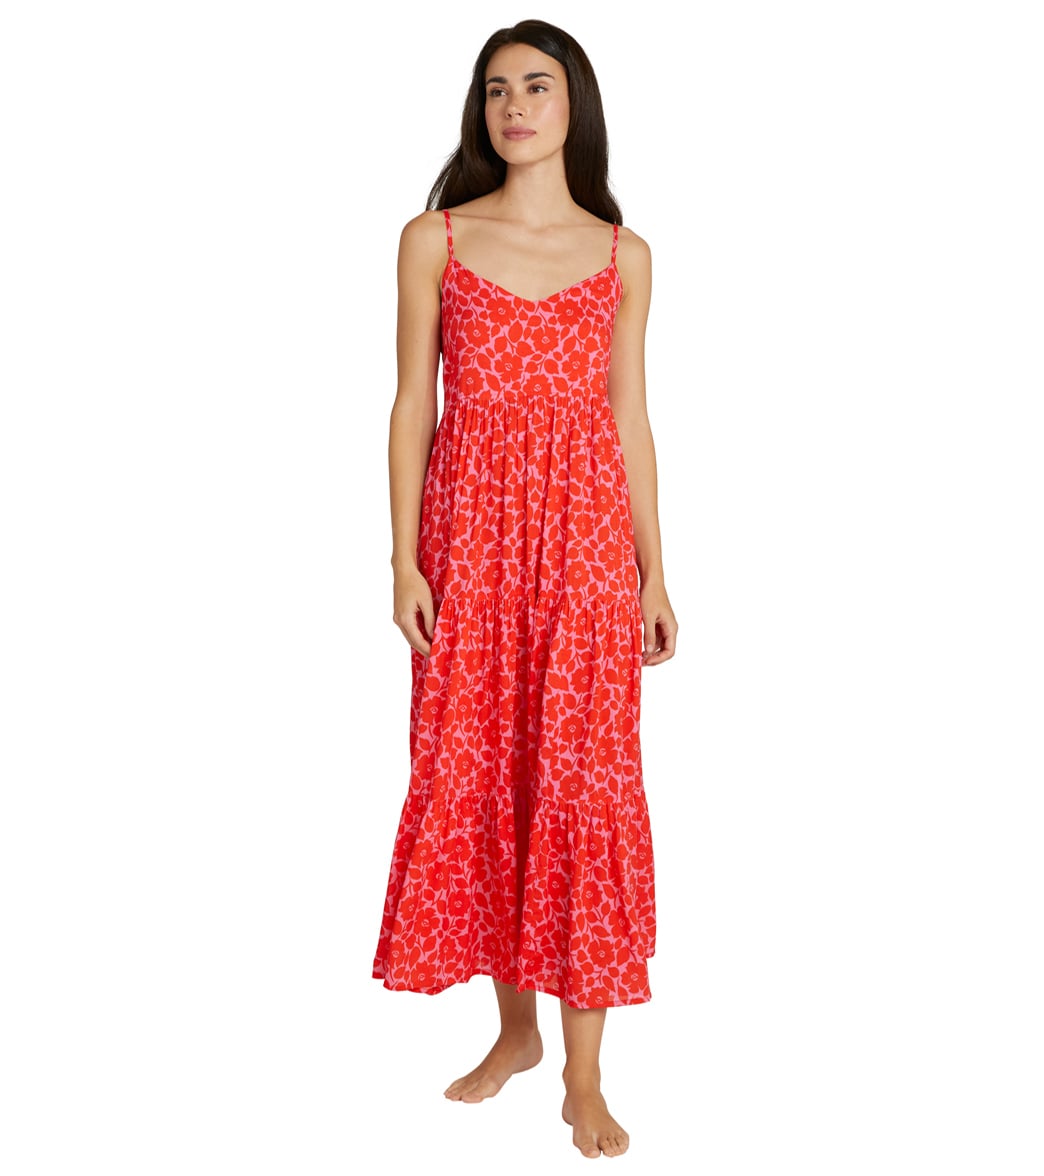 Kate Spade New York Womens Rosy Garden Tiered Midi Cover Up Dress